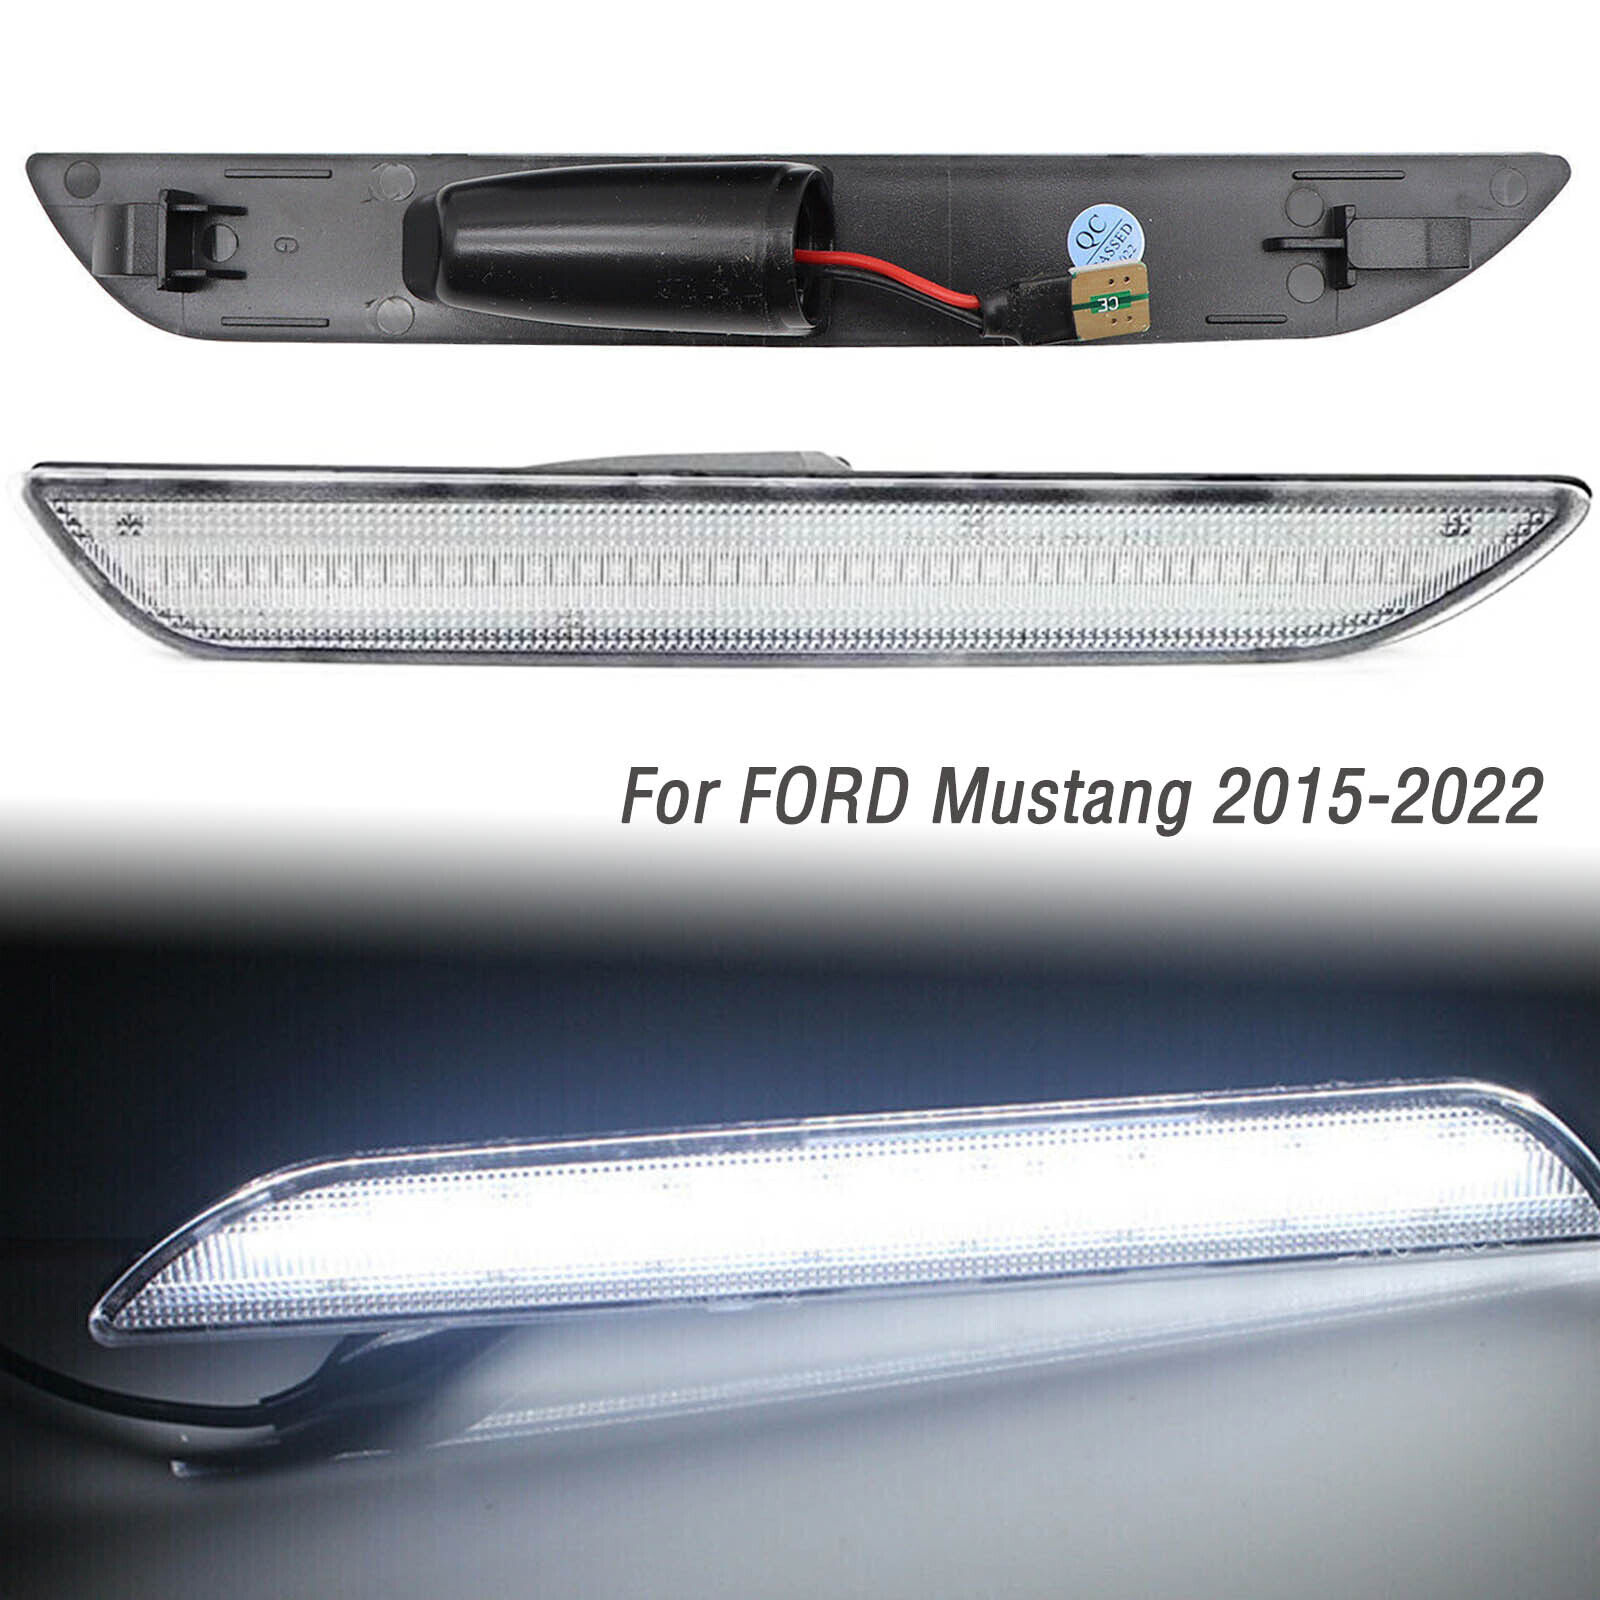 2x For 2015-22 Ford Mustang Clear Lens Rear Bumper Side Marker Lights Lamps